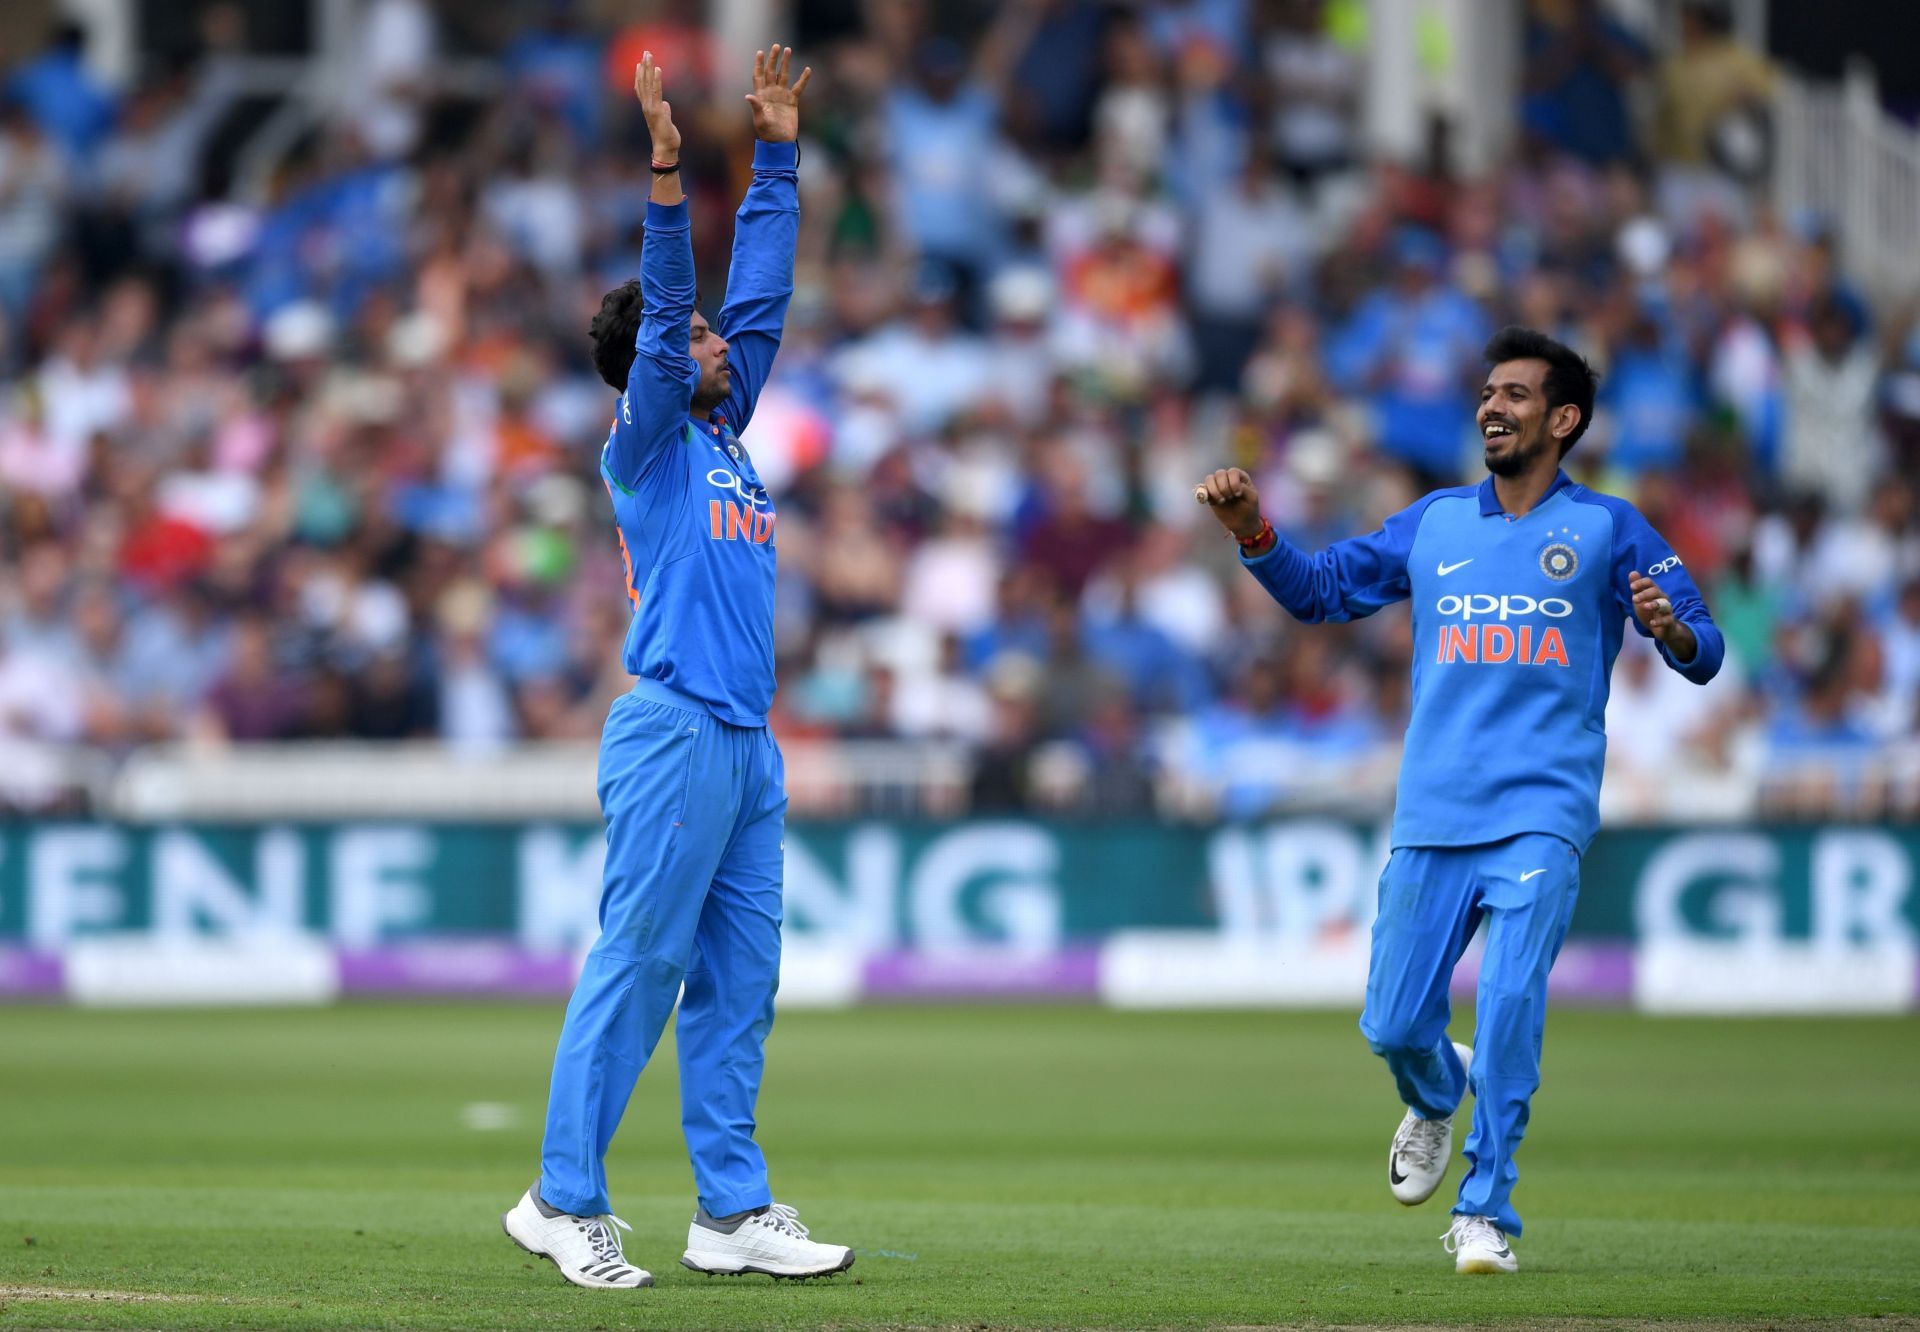 Kuldeep Yadav (left) celebrates a wicket with Yuzvendra Chahal. (Pic: Getty Images)